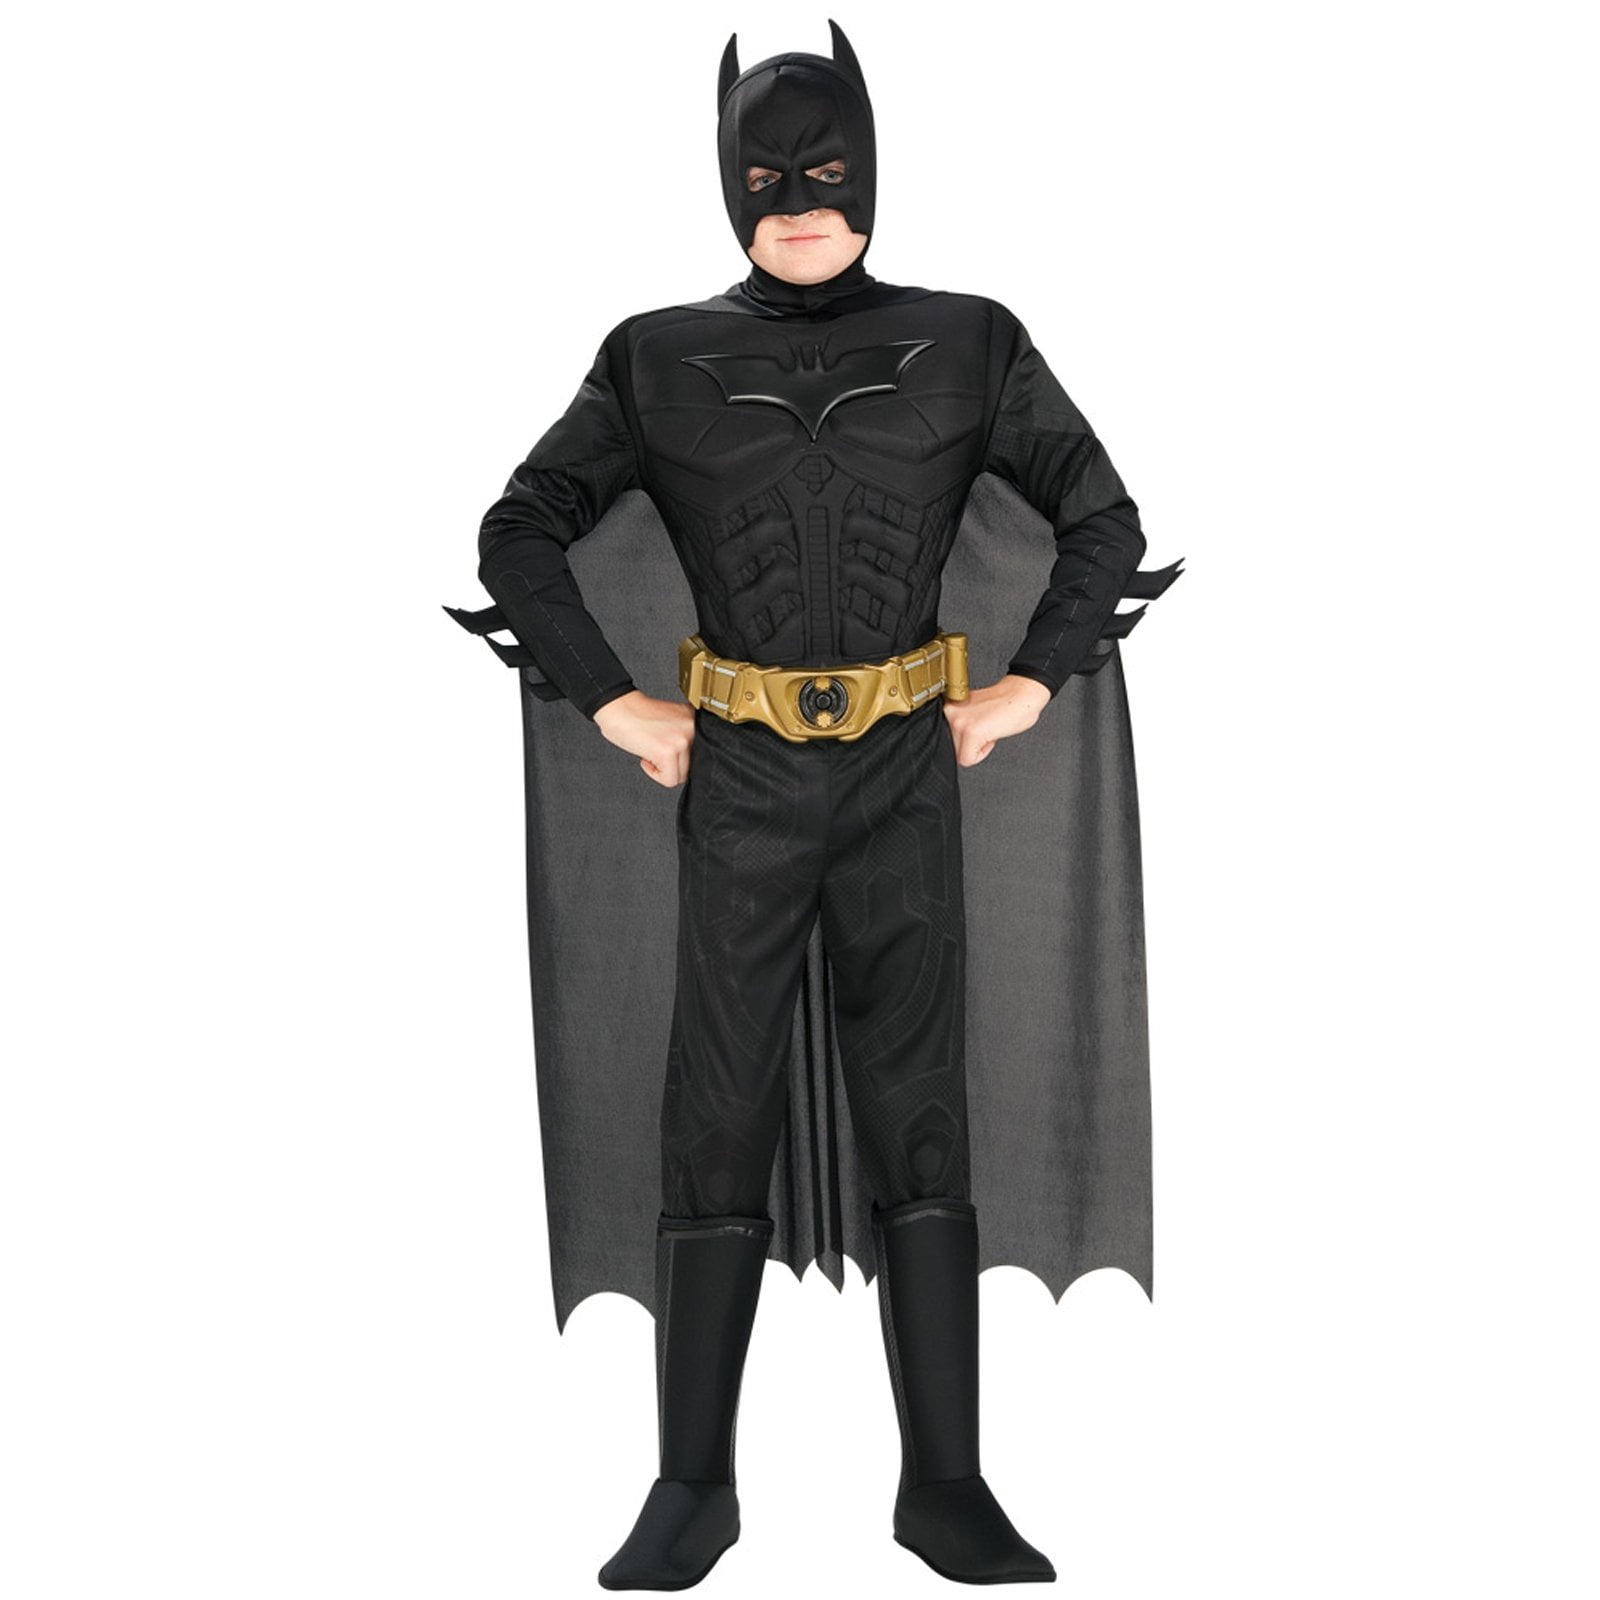 Domestic 640019 Small Rubies Rubies Justice League Childs Tactical Batman Costume